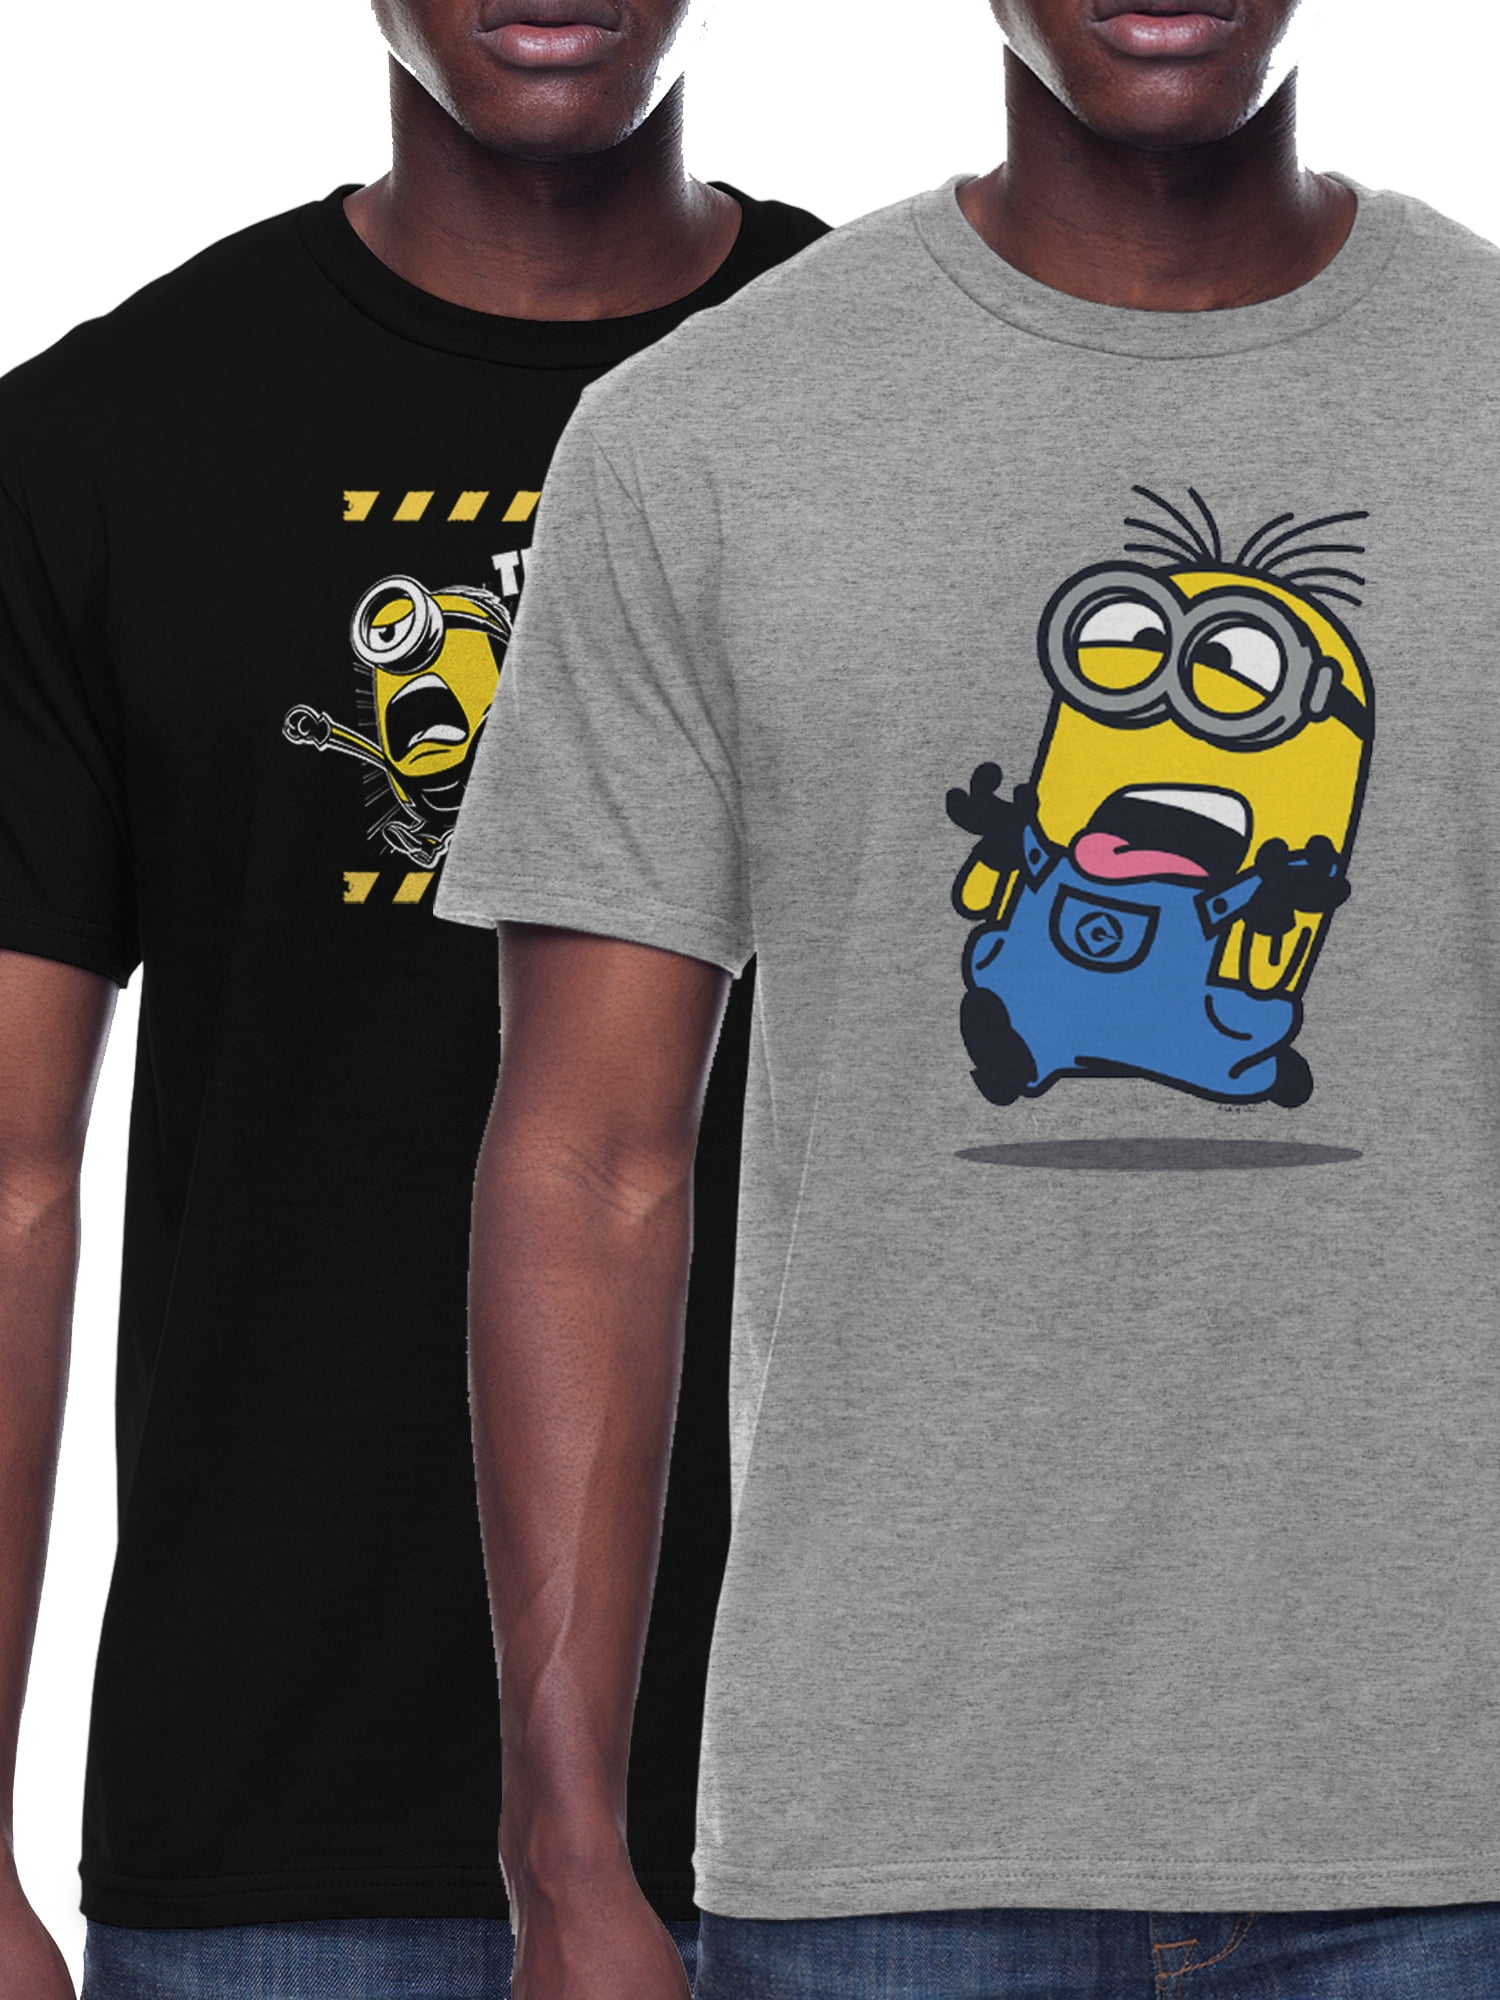 Minions Try Karate & Minion Dave Men's Short Sleeve Graphic Tees, 2 ...